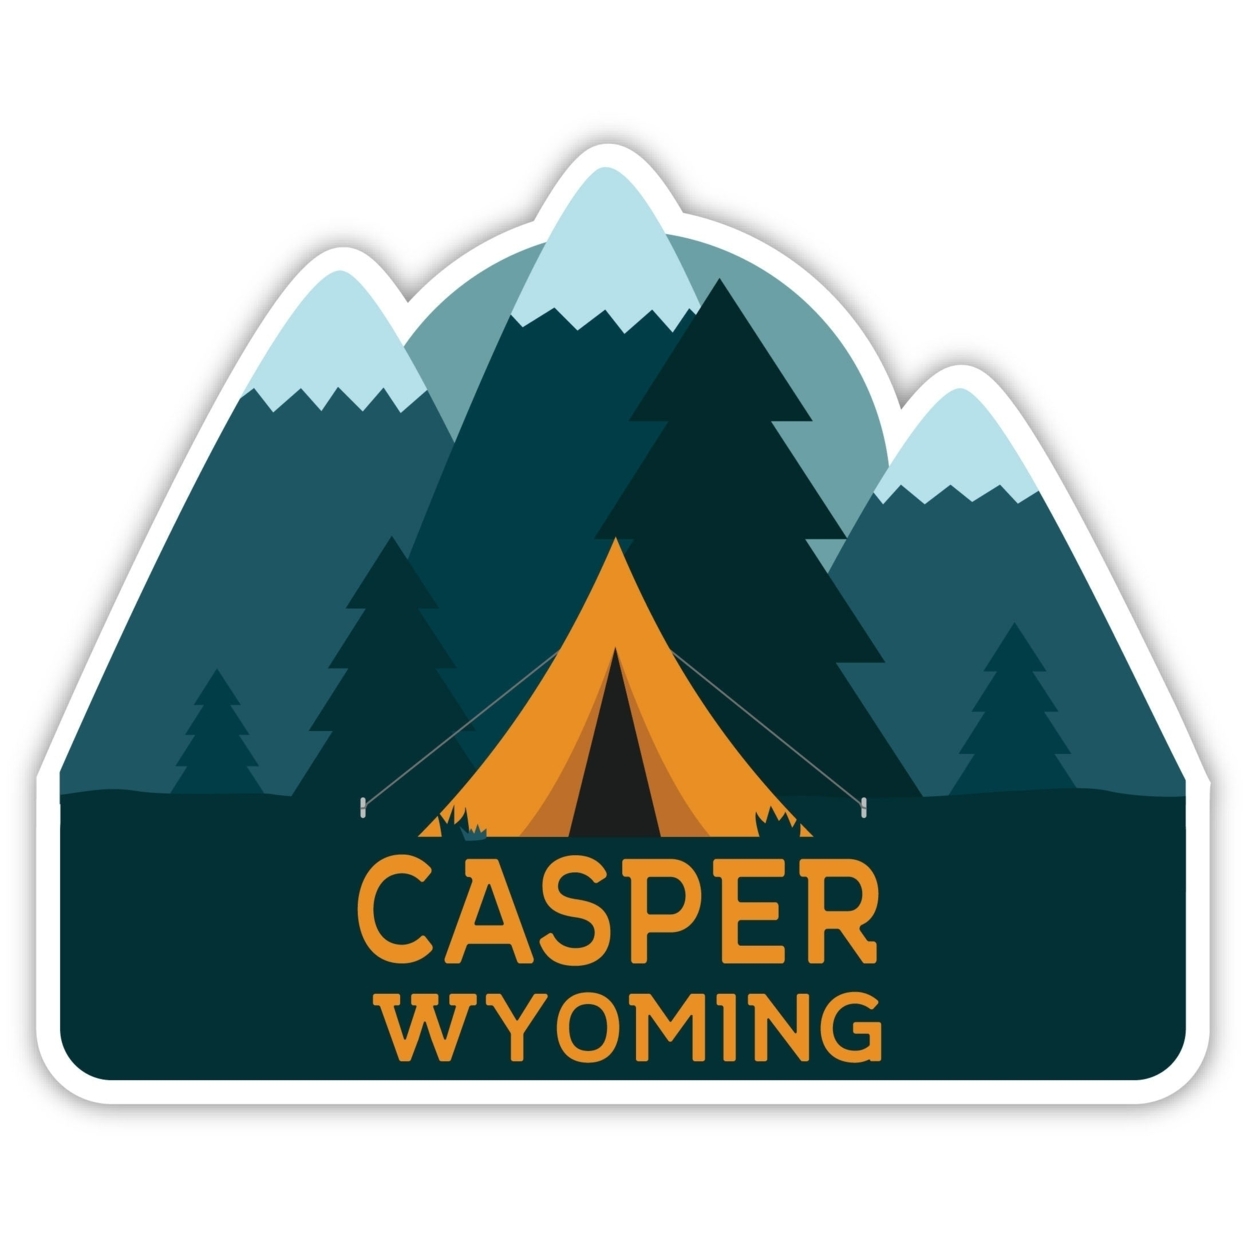 Casper Wyoming Souvenir Decorative Stickers (Choose Theme And Size) - 4-Pack, 10-Inch, Tent